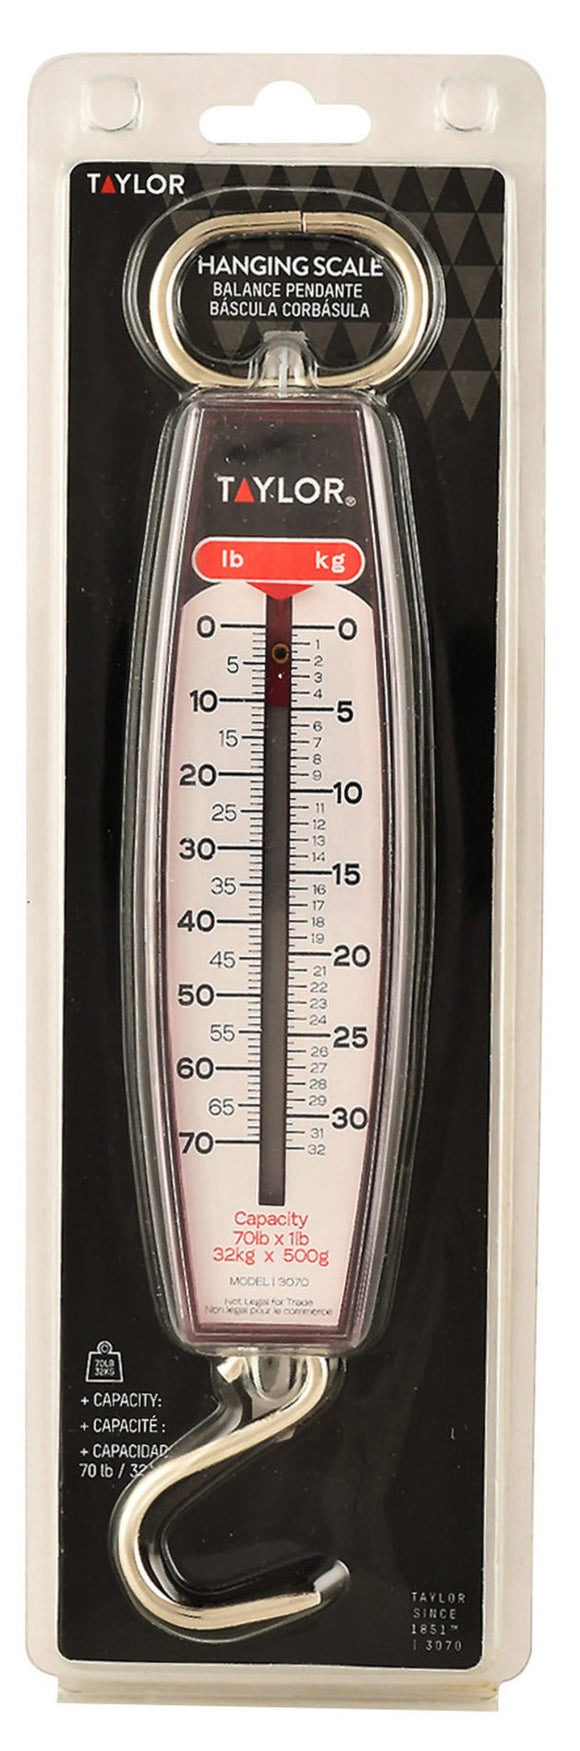 Taylor Hanging Scale